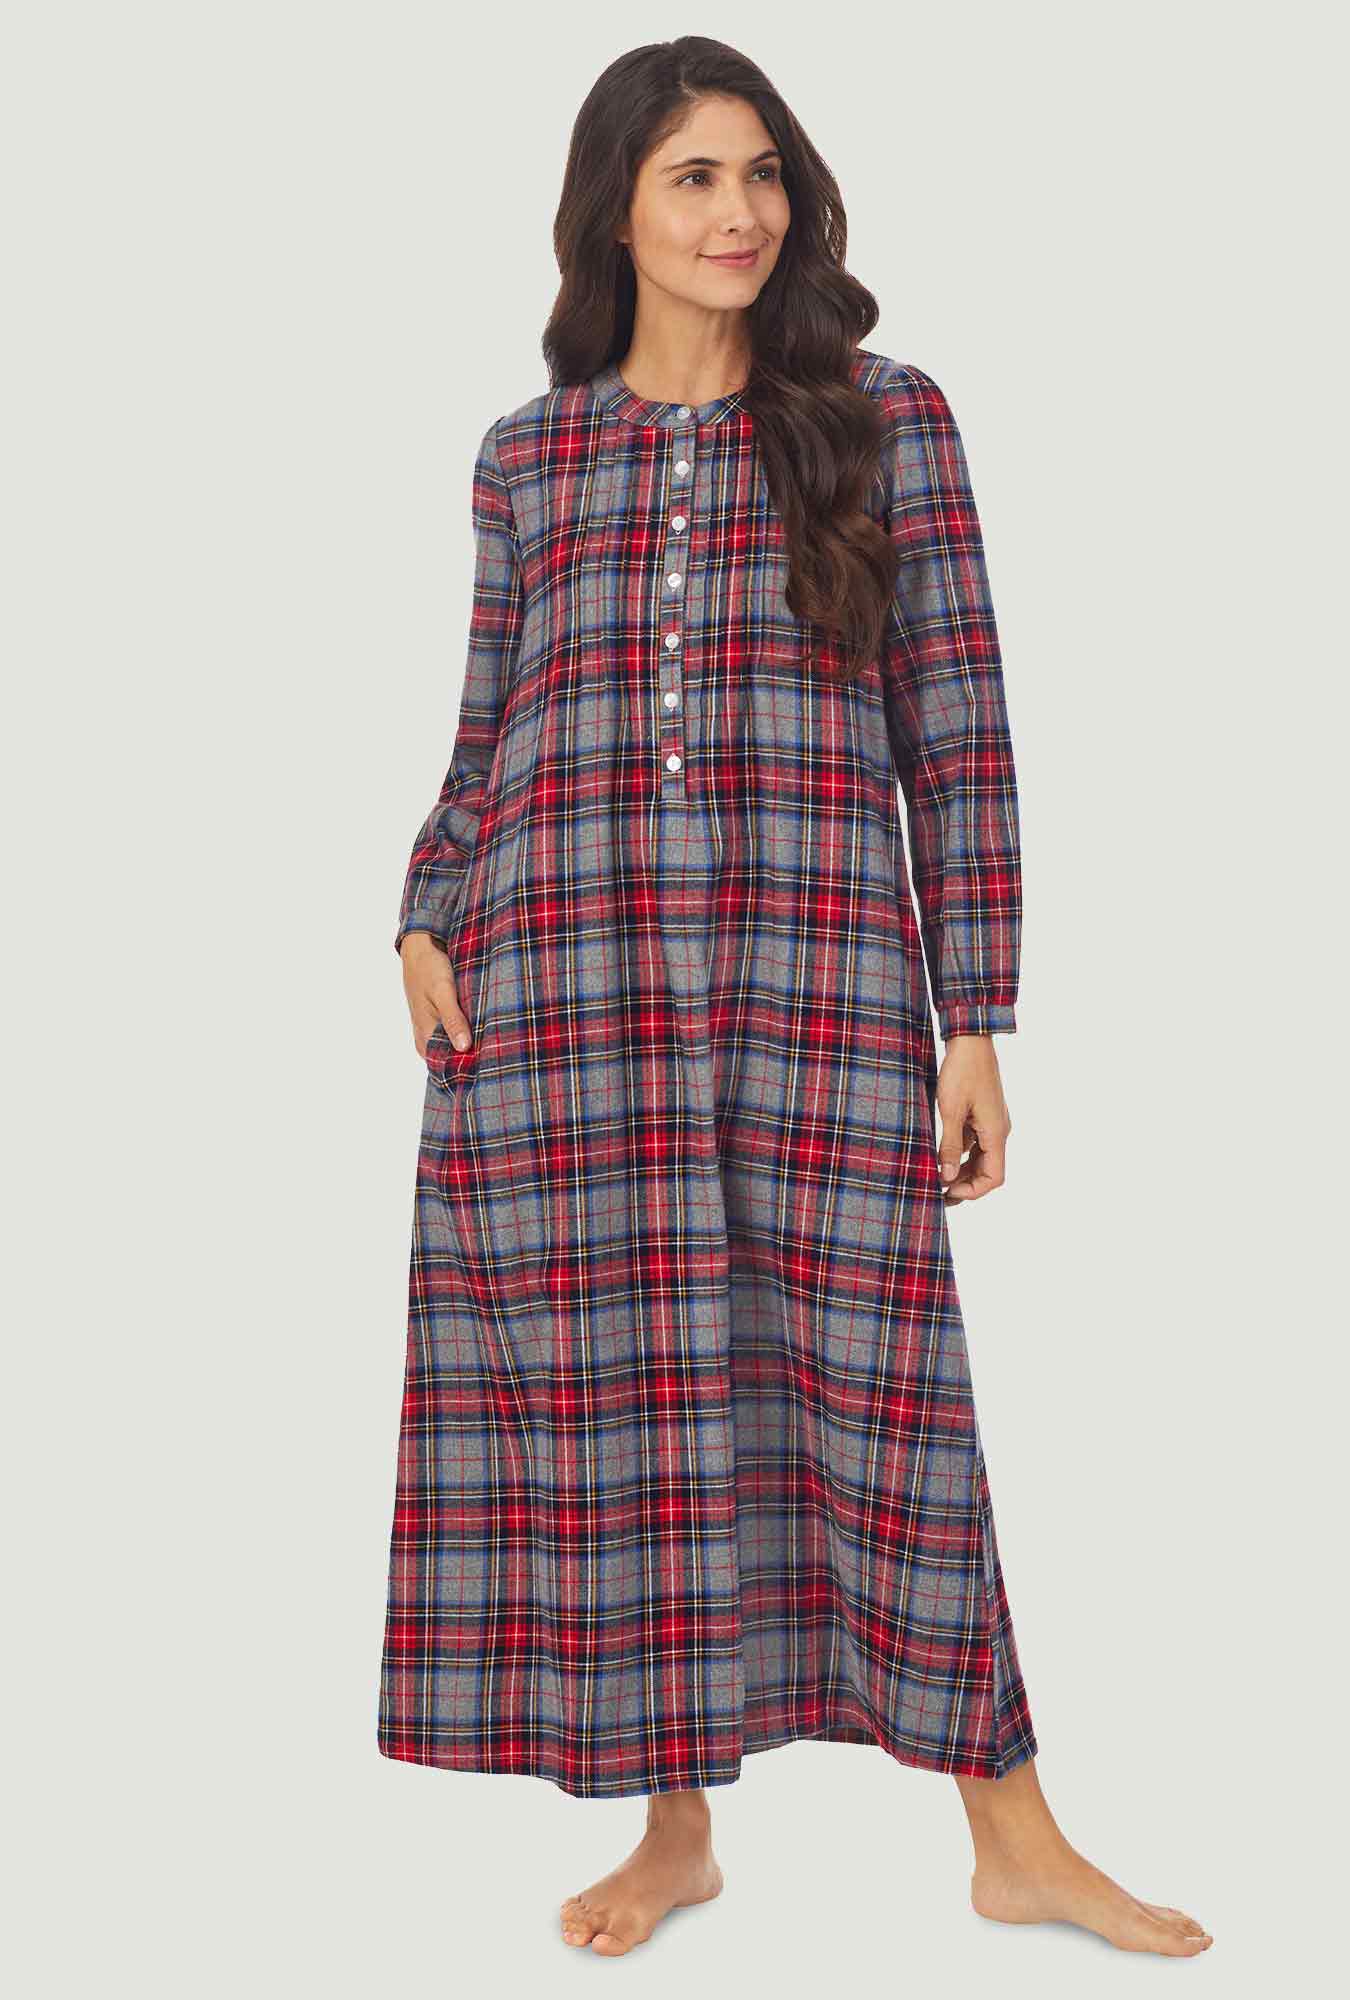  A lady wearing grey plaid flannel gown with long sleeves